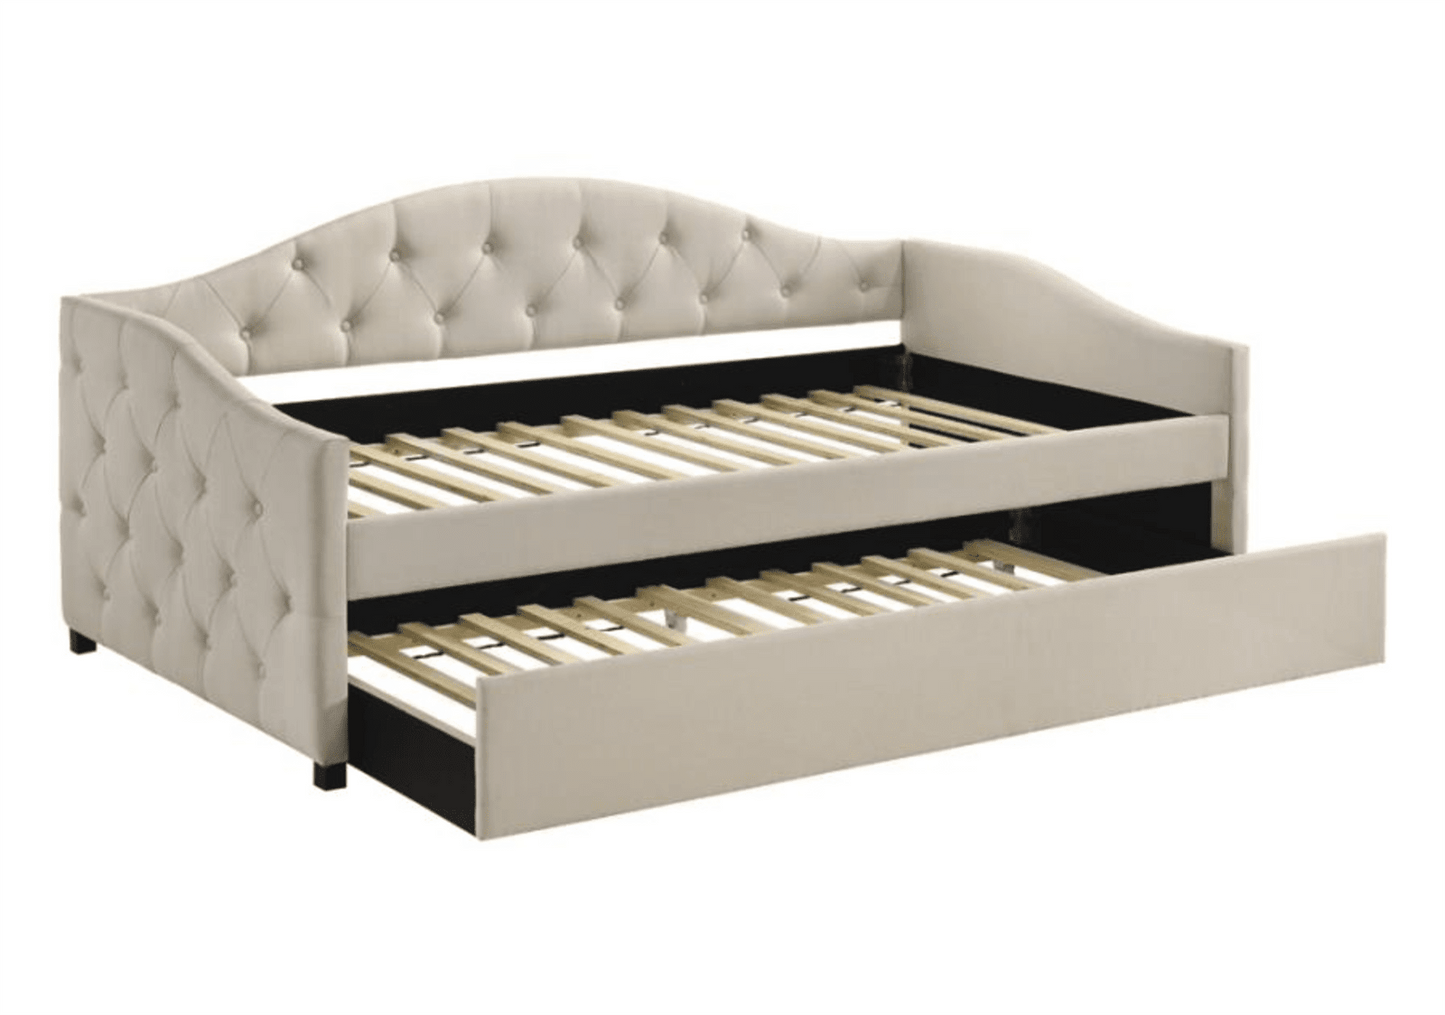 Sadie Camelback Daybed & Trundle in Taupe Woven Fabric